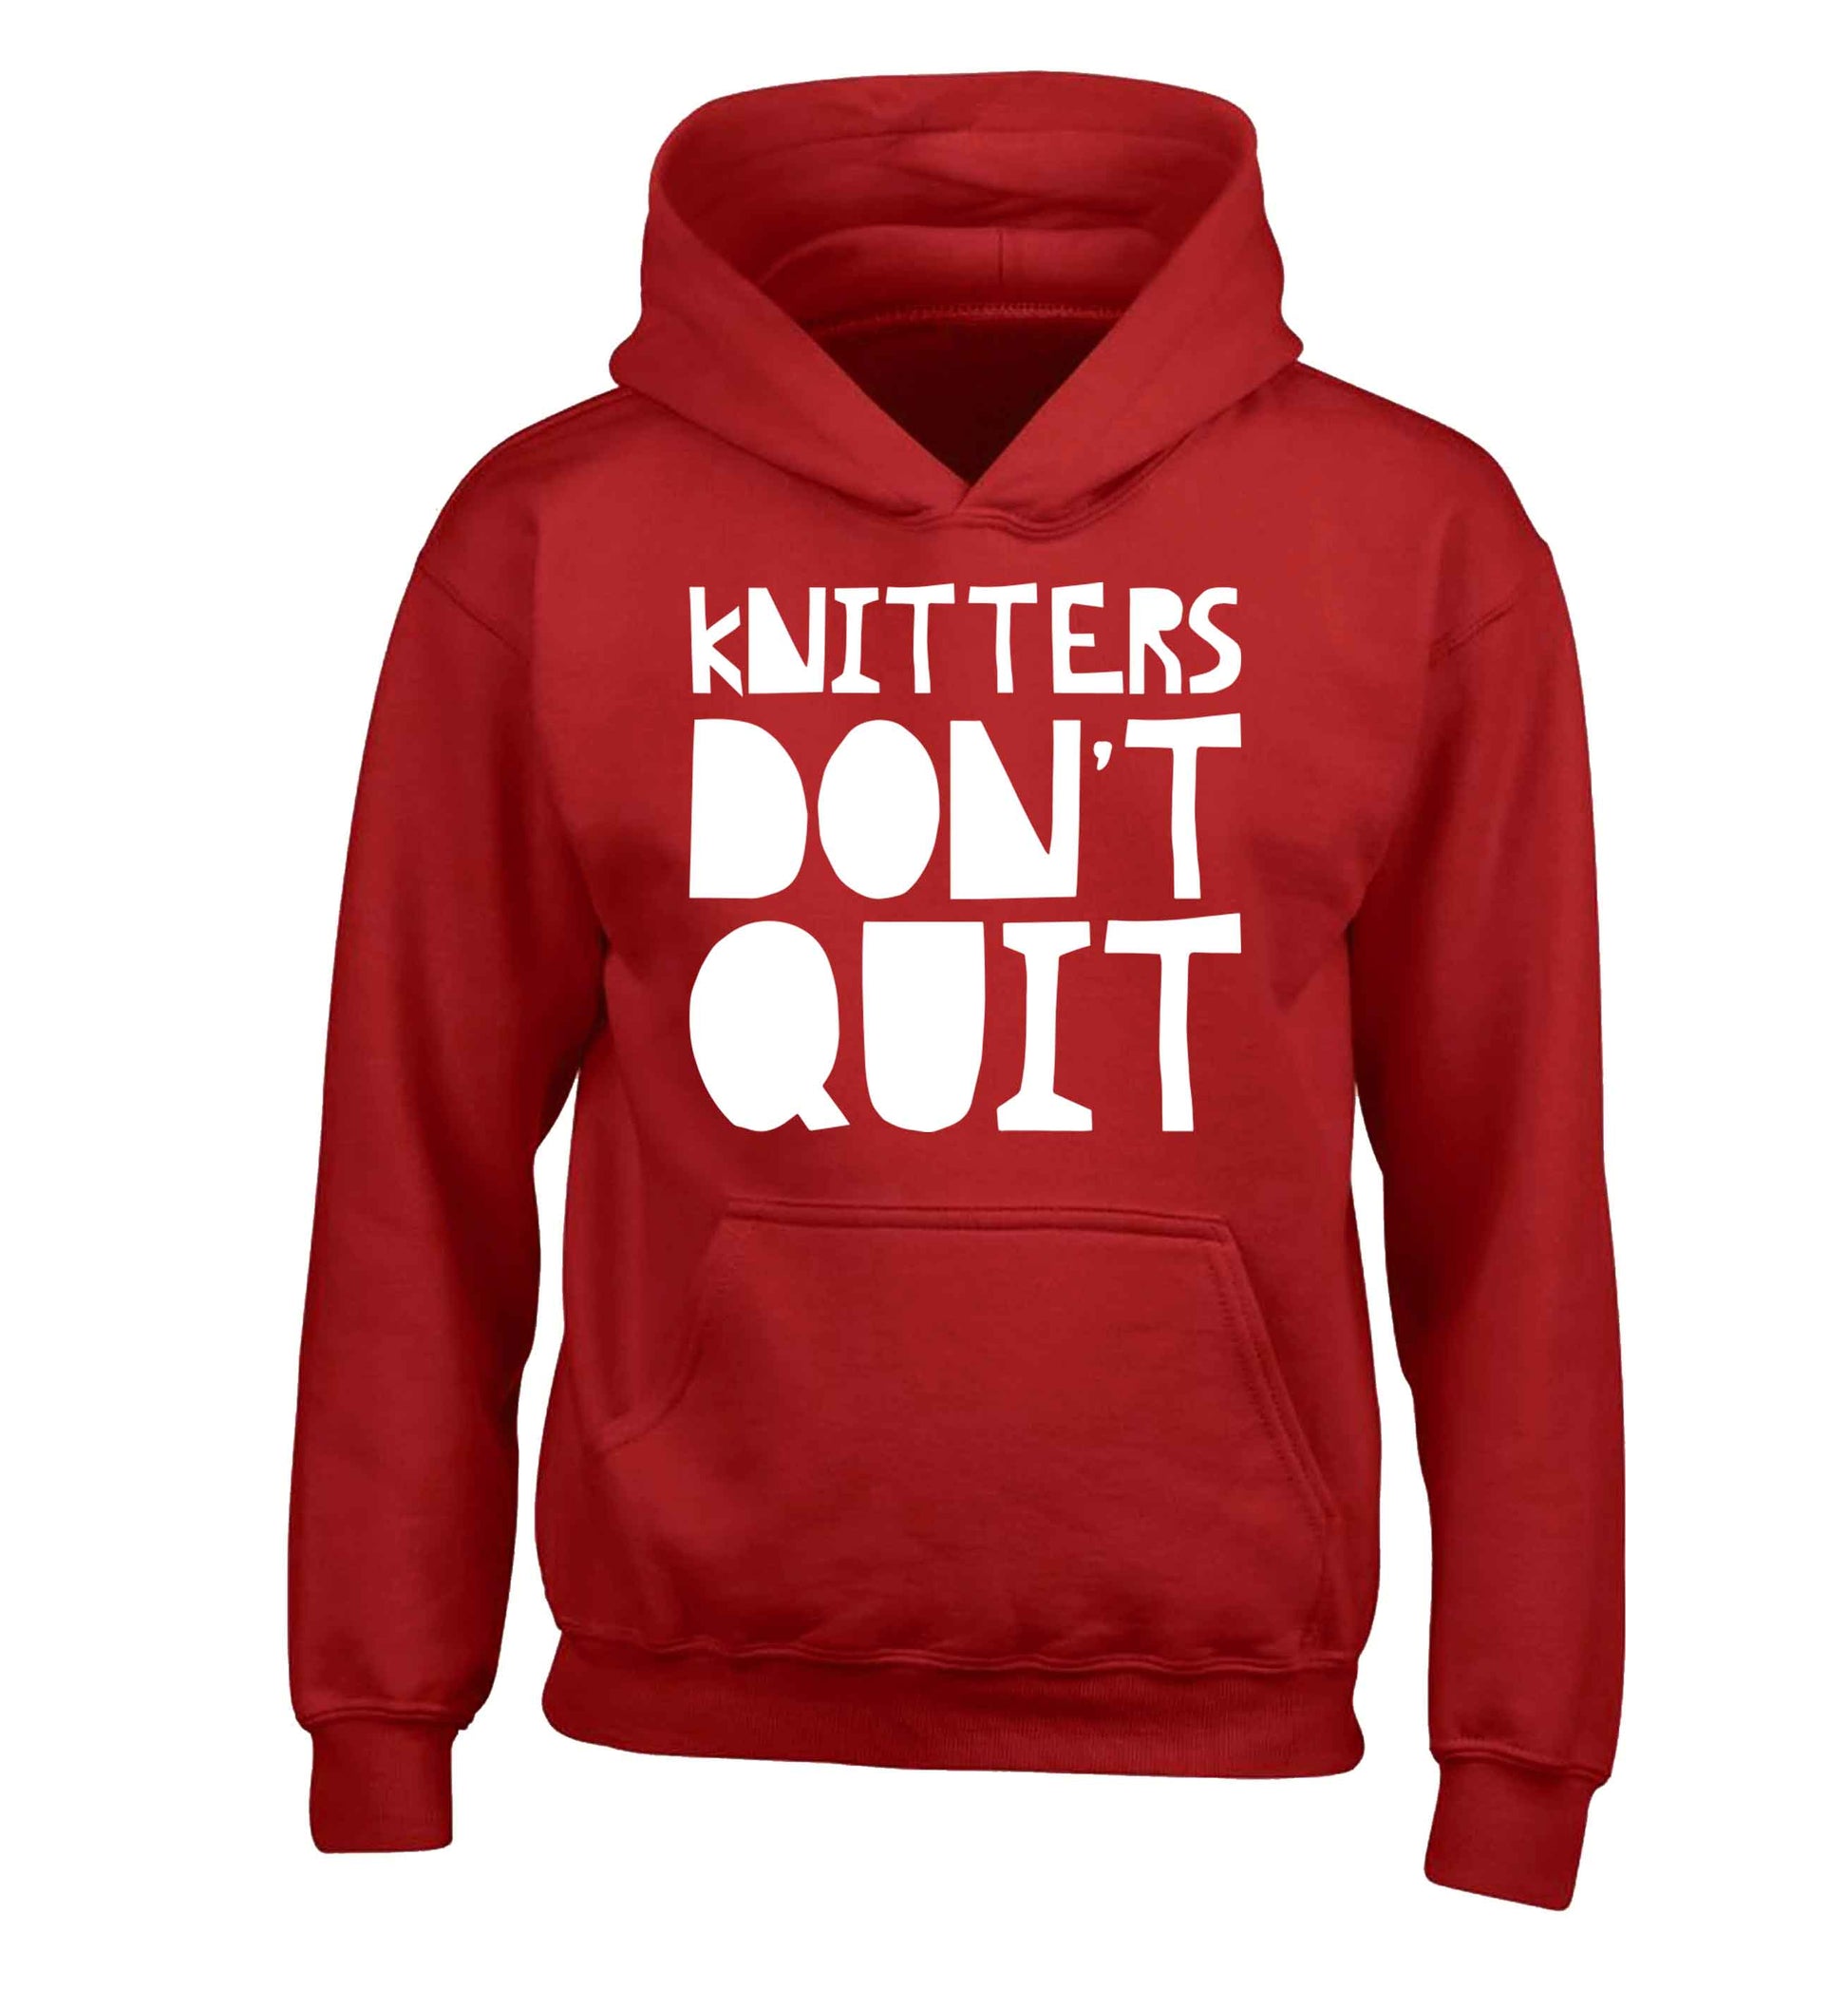 Knitters don't quit children's red hoodie 12-13 Years